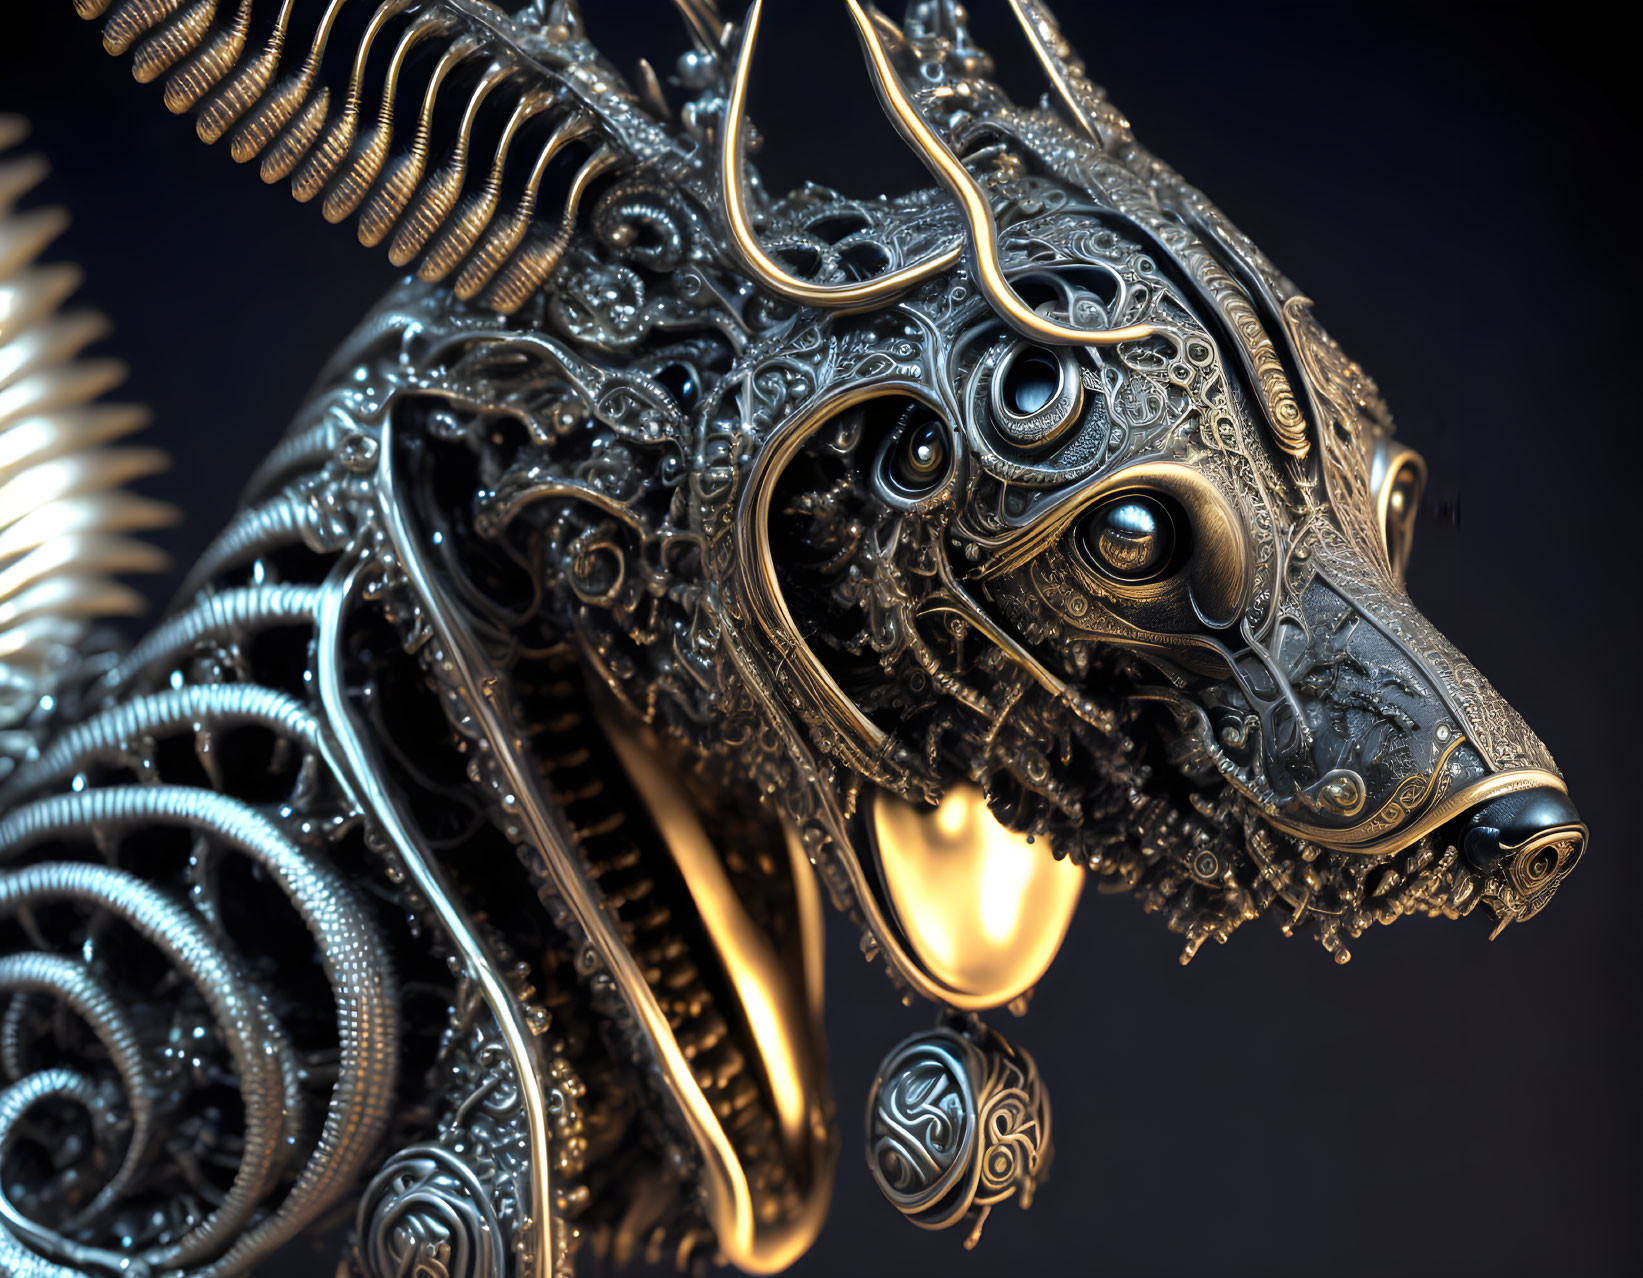 Metallic Wolf Head with Ornate Patterns and Mechanical Components on Dark Background